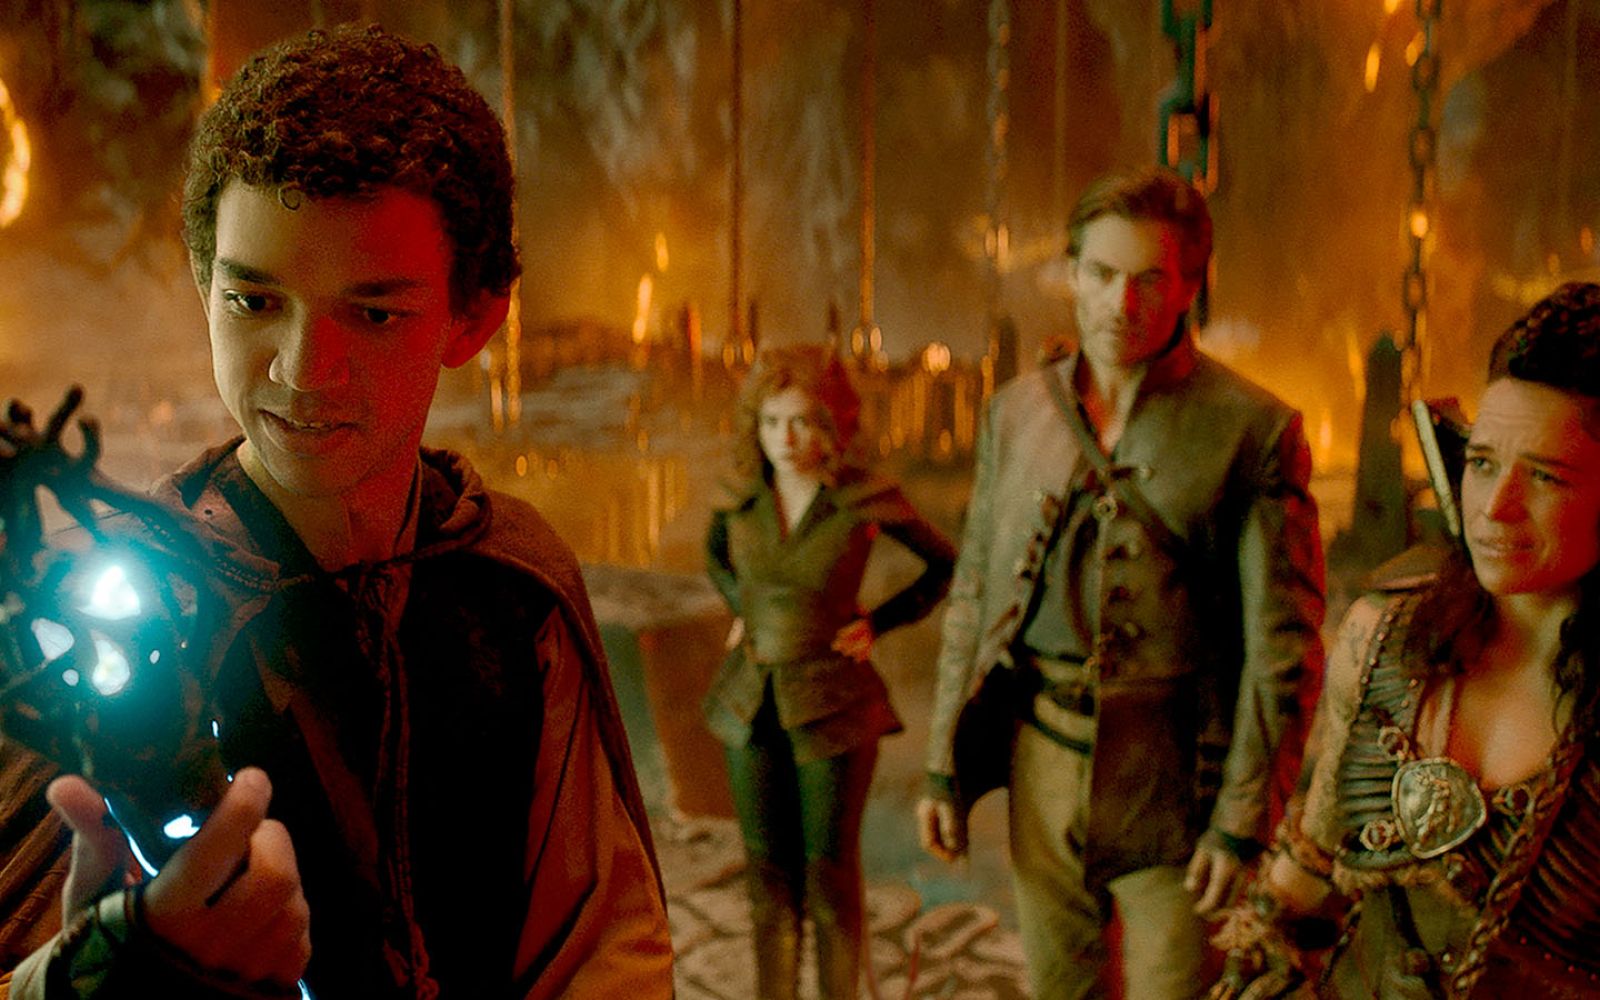 Dungeons & Dragons: Honor Among Thieves, starring, from left, Justice Smith, Sophia Lillis, Chris Pine, and Michelle Rodriguez, opened at No. 1 at the U.S. Box Office.